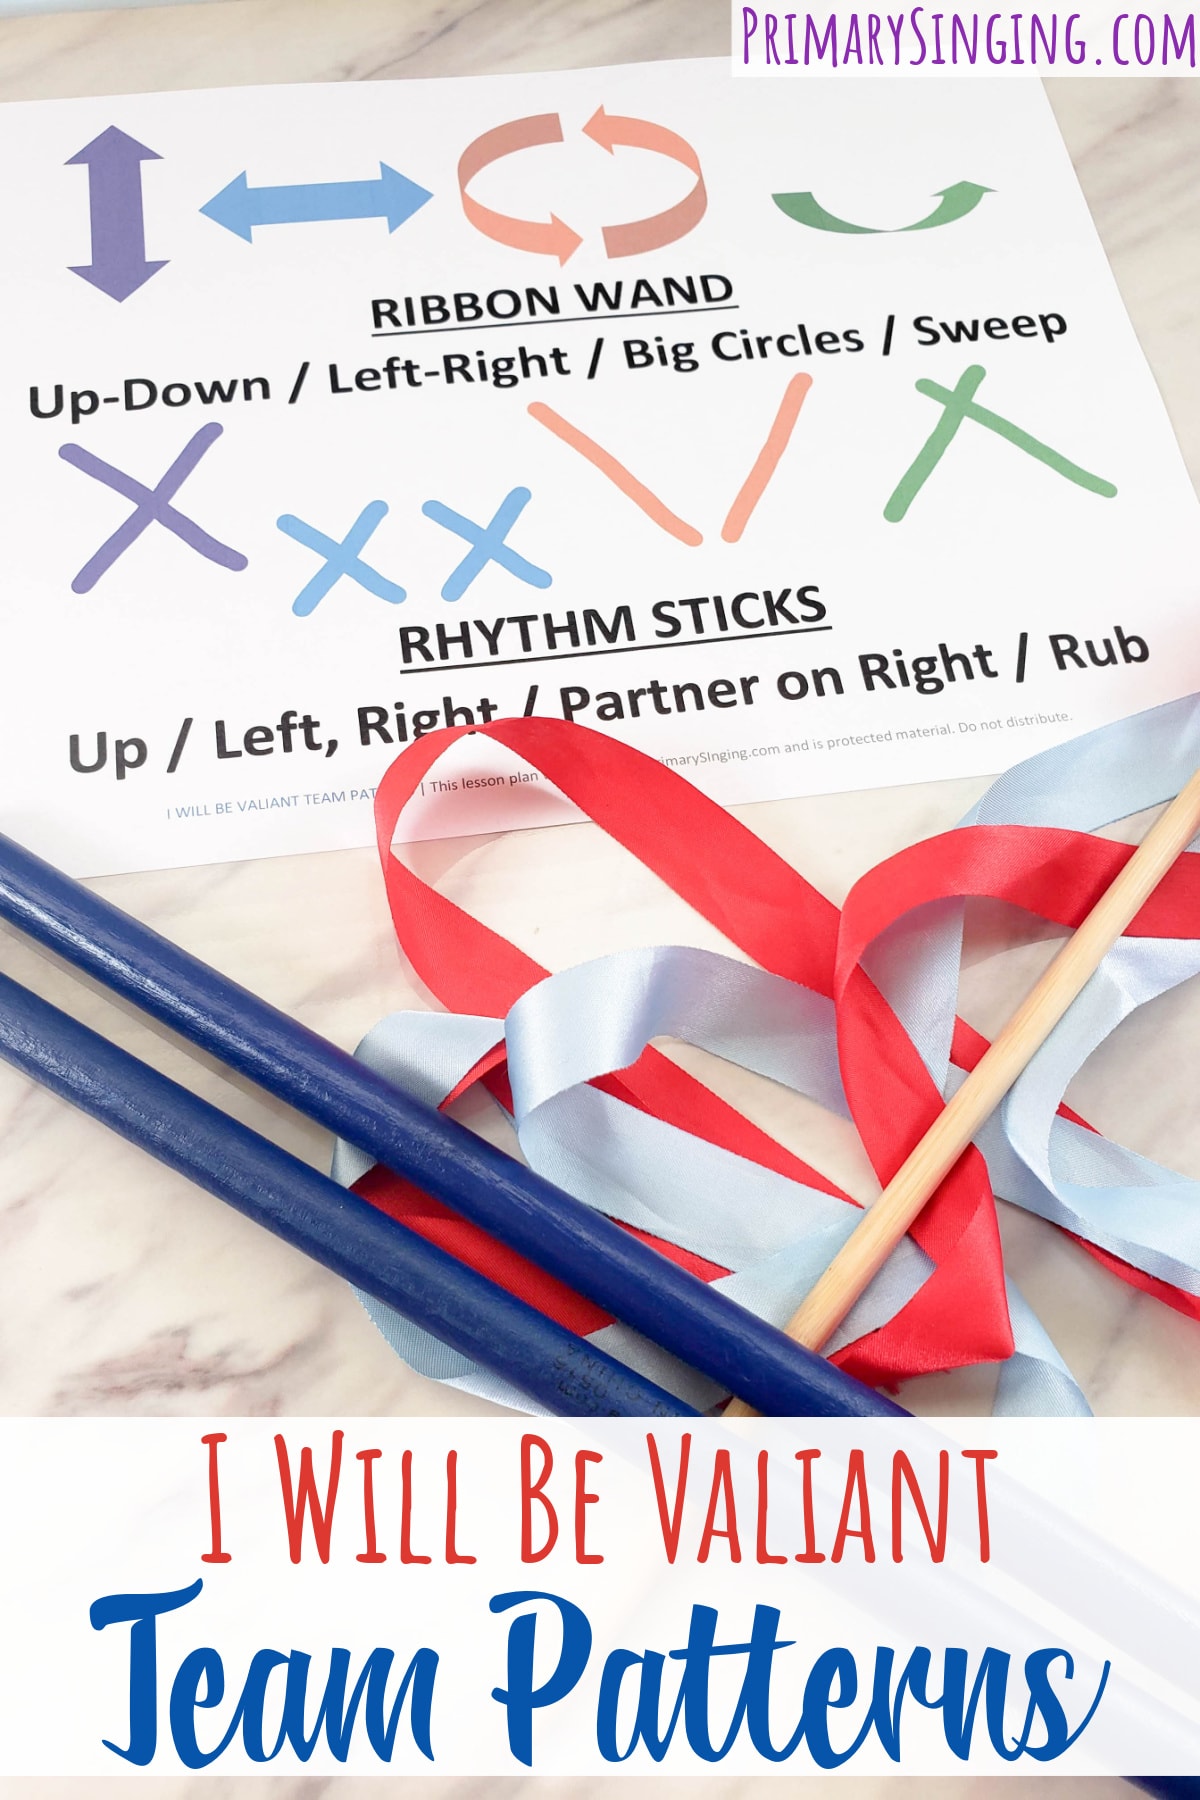 This I Will Be Valiant Team Patterns singing time idea includes ribbon wands and rhythm sticks for a fun and exciting activity for LDS Primary music leaders.